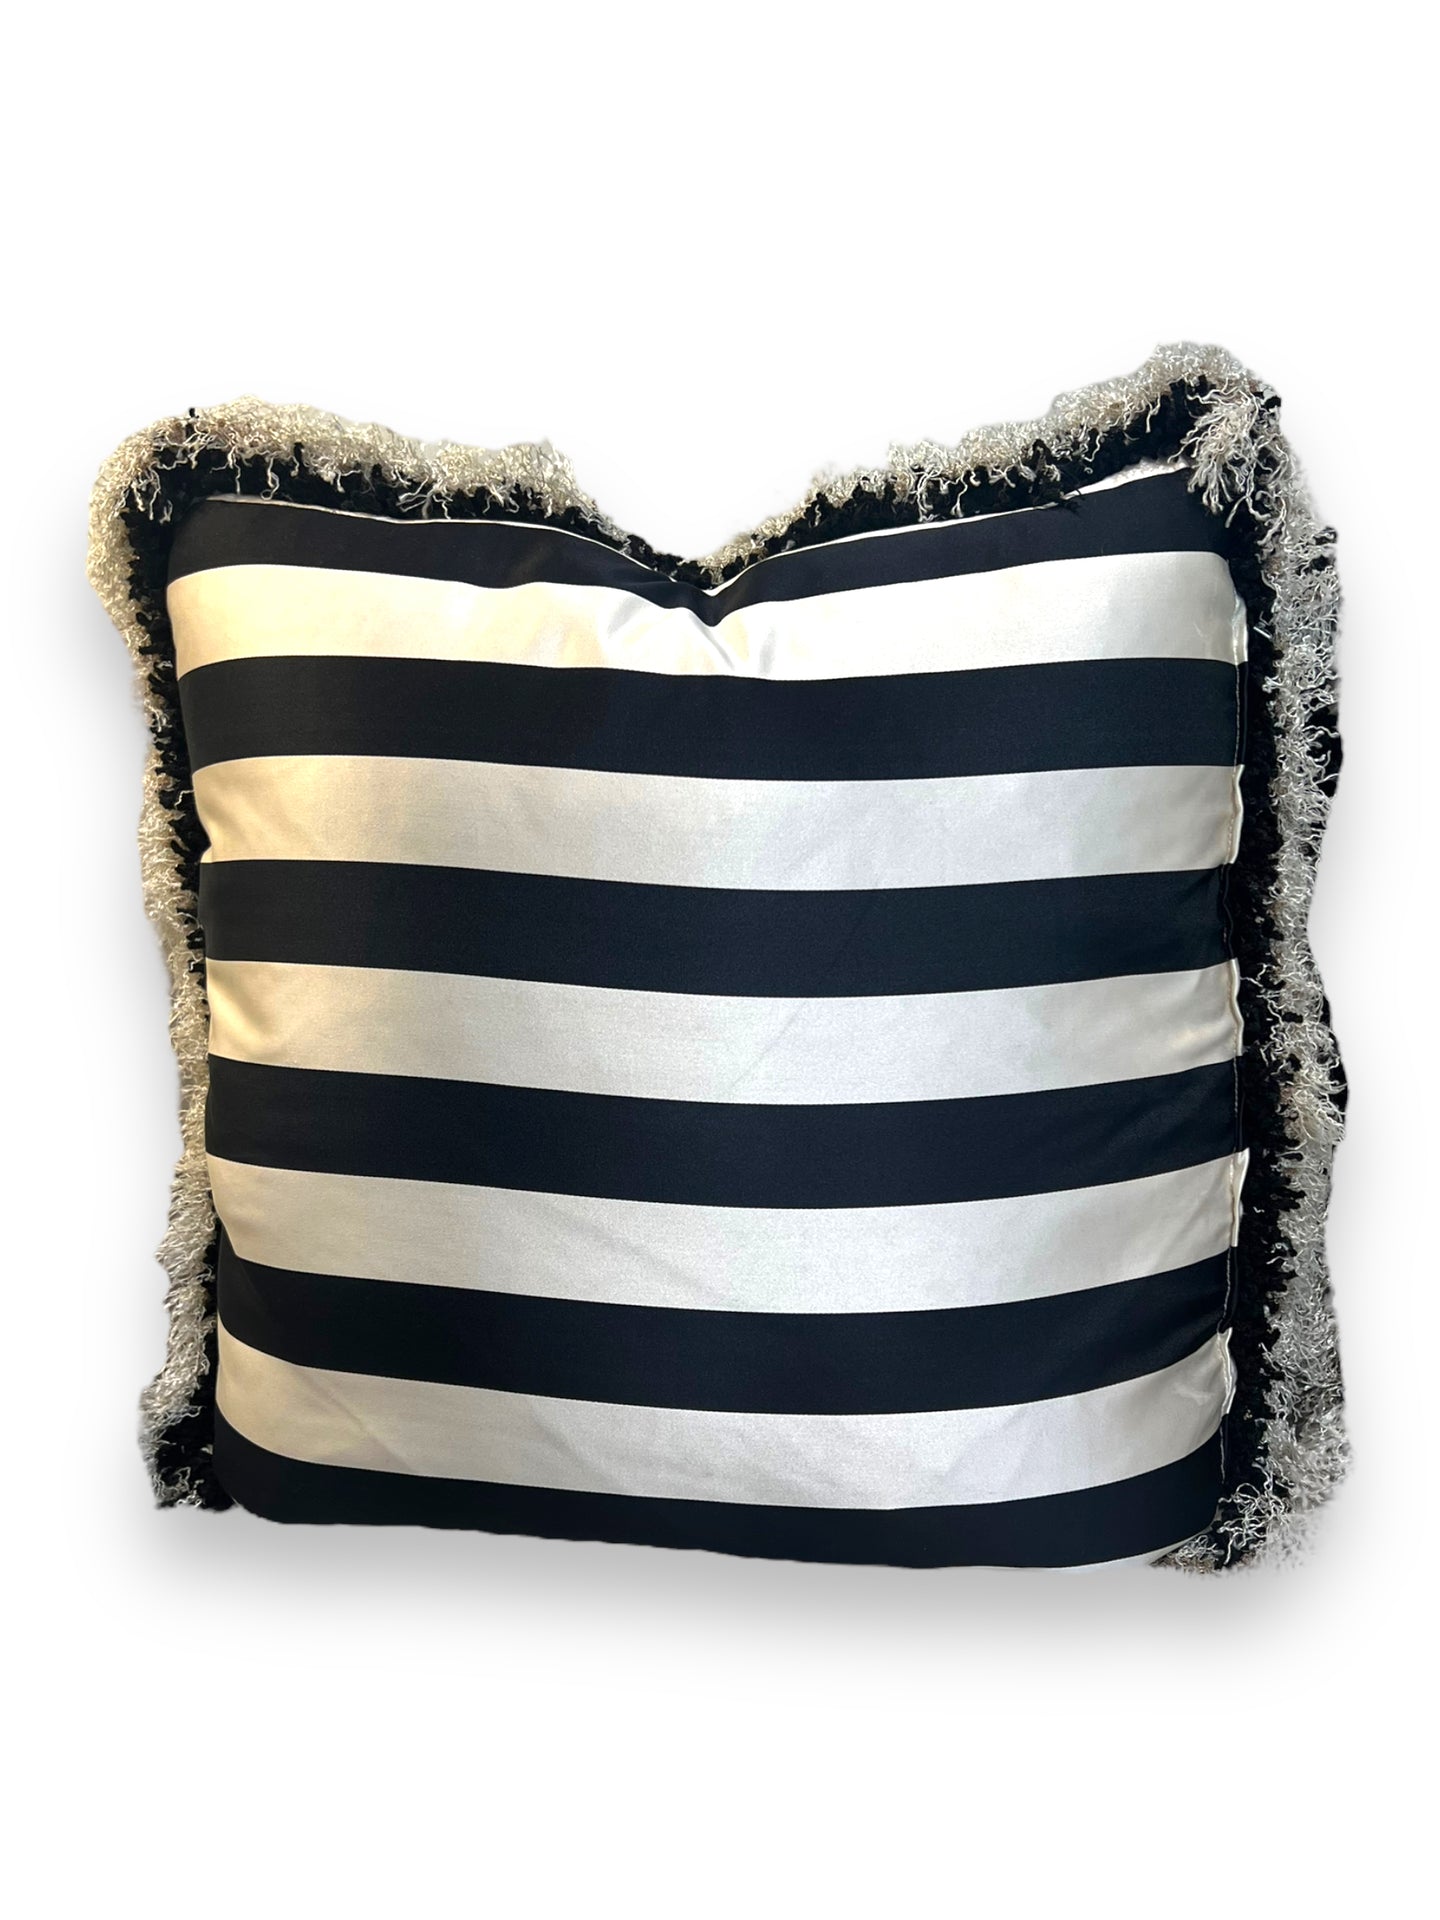 Large Black and White Stripe Pillow - DeFrenS